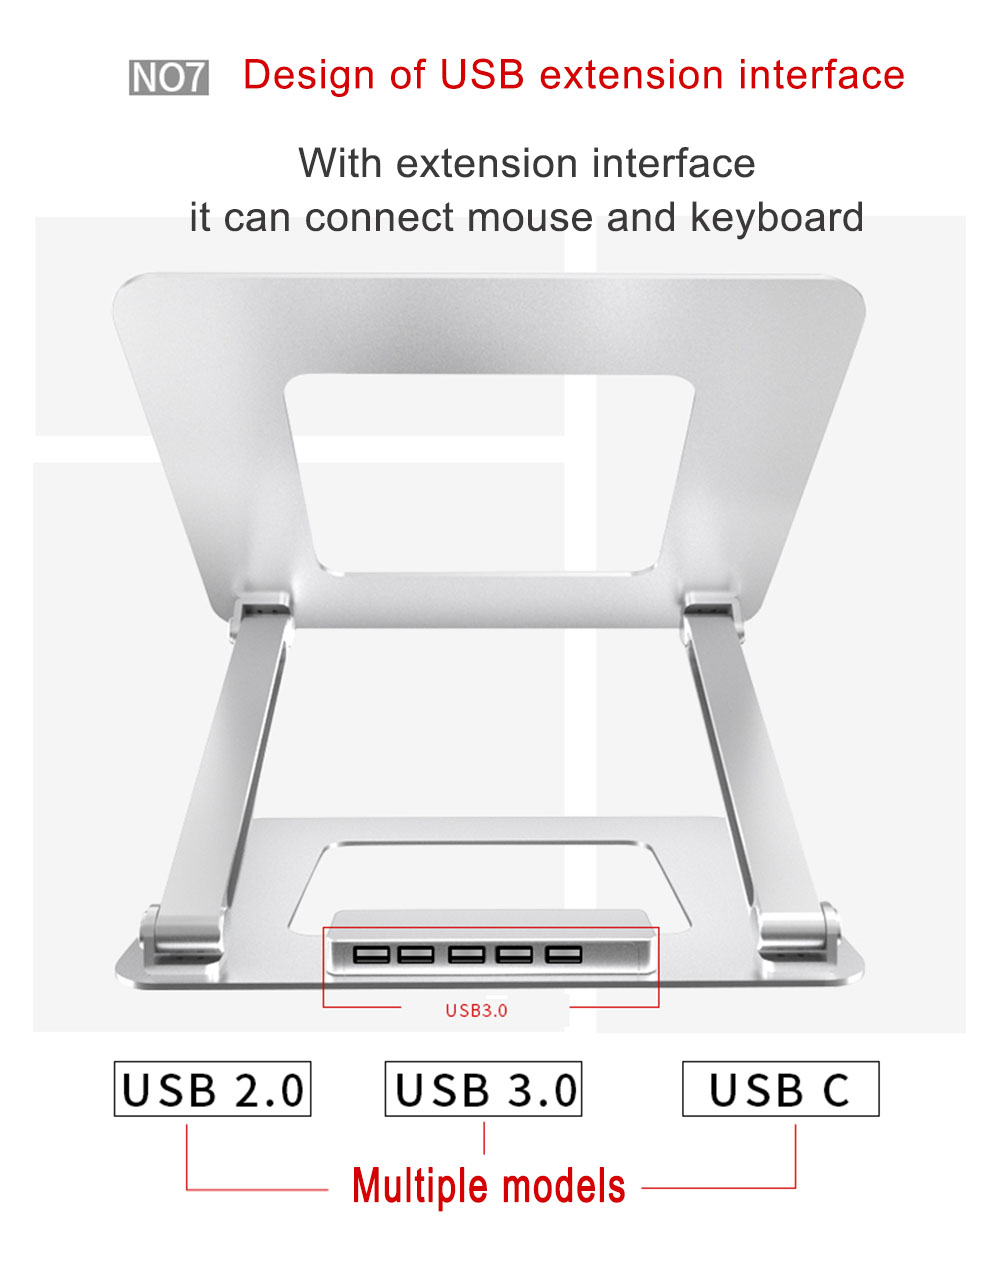 iDock-N37-3-Laptop-Stand-with-USB-30-Interface-Portable-Bracket-Foldable-Aluminum-Alloy-Computer-Hea-1725642-6